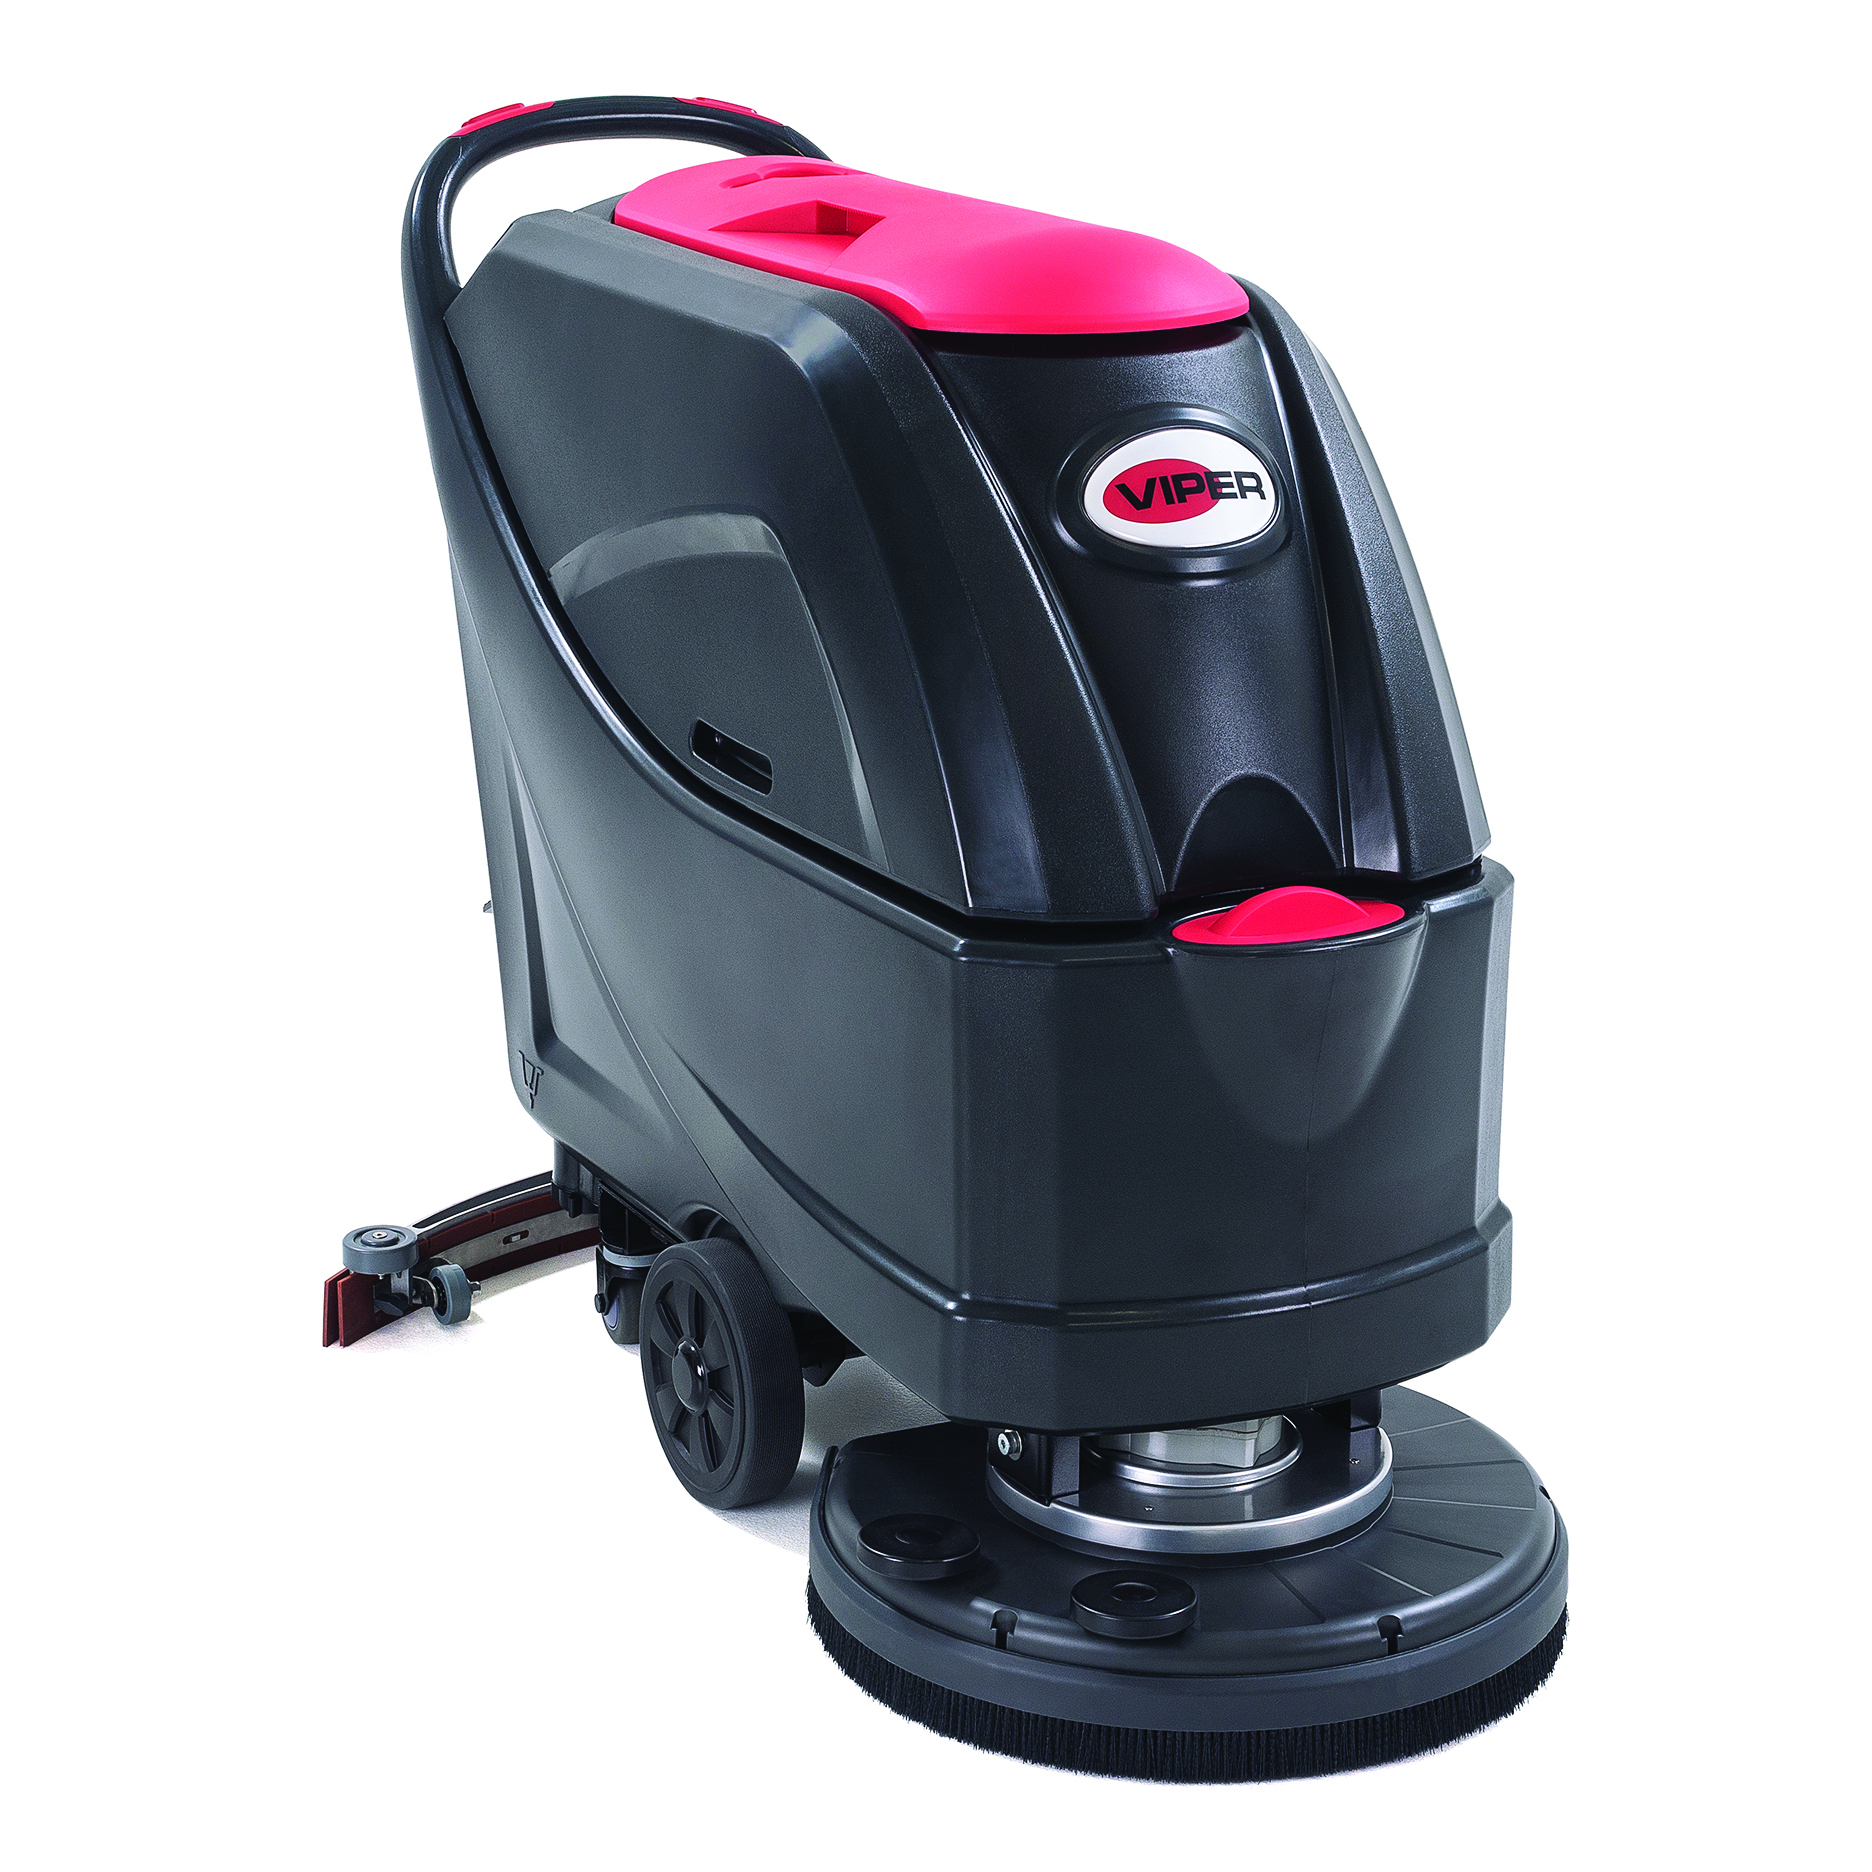 AS5160 Viper 20&quot; auto scrubber
16-gal, pad-assist drive, pad
driver, 31&quot; squeegee
assembly, 10-amp charger, 105
a/h WET batteries